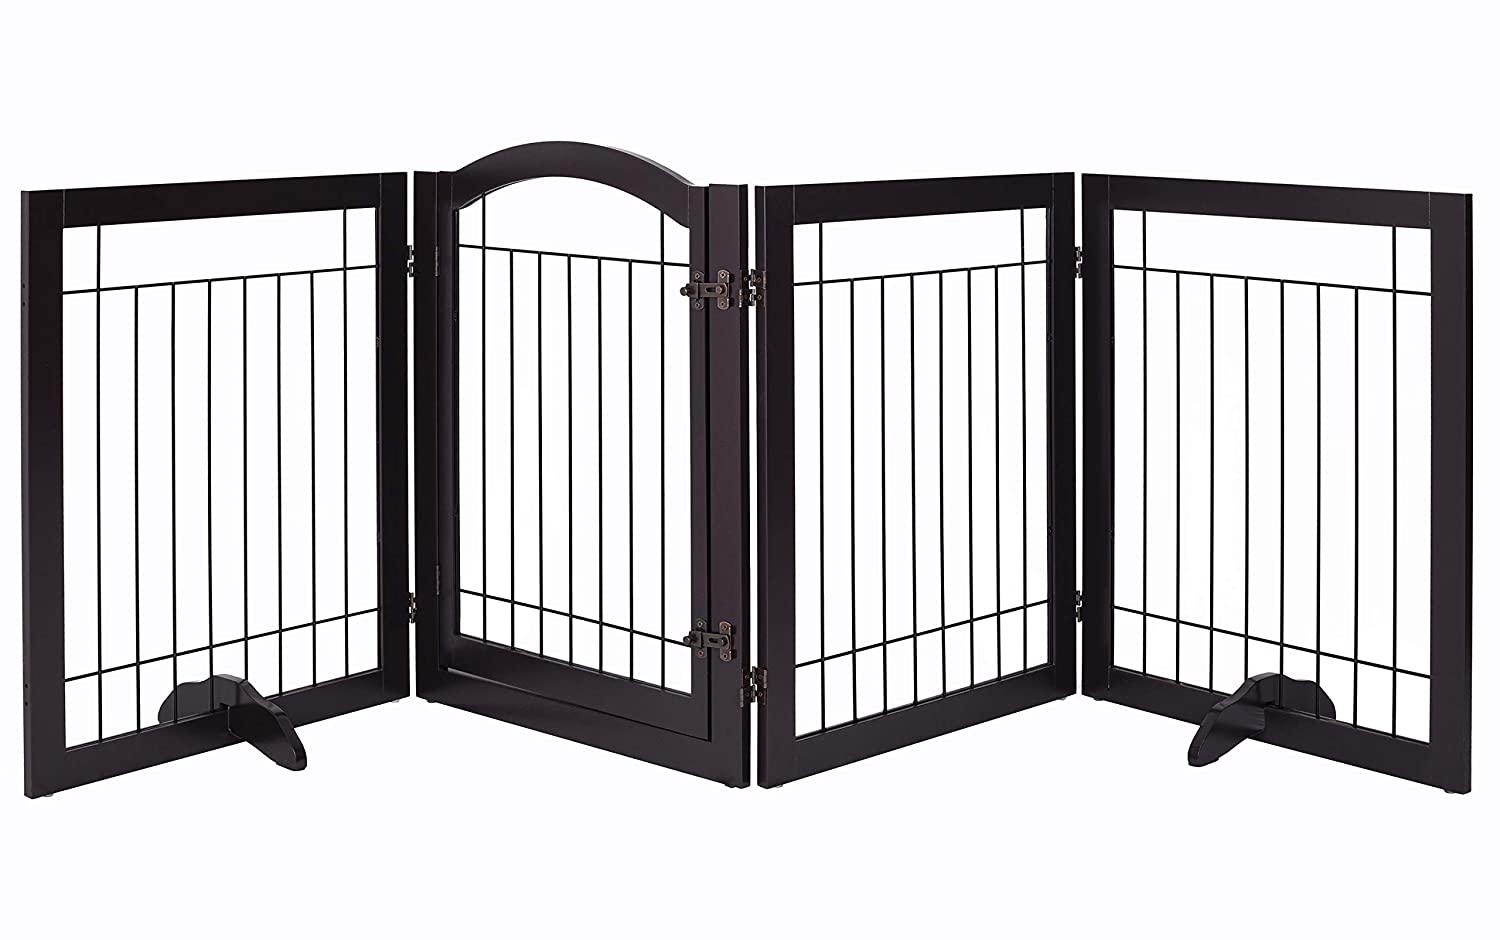 PAWLAND 96-inch Extra Wide 30-inches Tall Dog gate with Door Walk Through, Freestanding Wire Pet Gate for The House, Doorway, Stairs, Pet Puppy Safety Fence, Support Feet Included(Espresso) - image 4 of 6